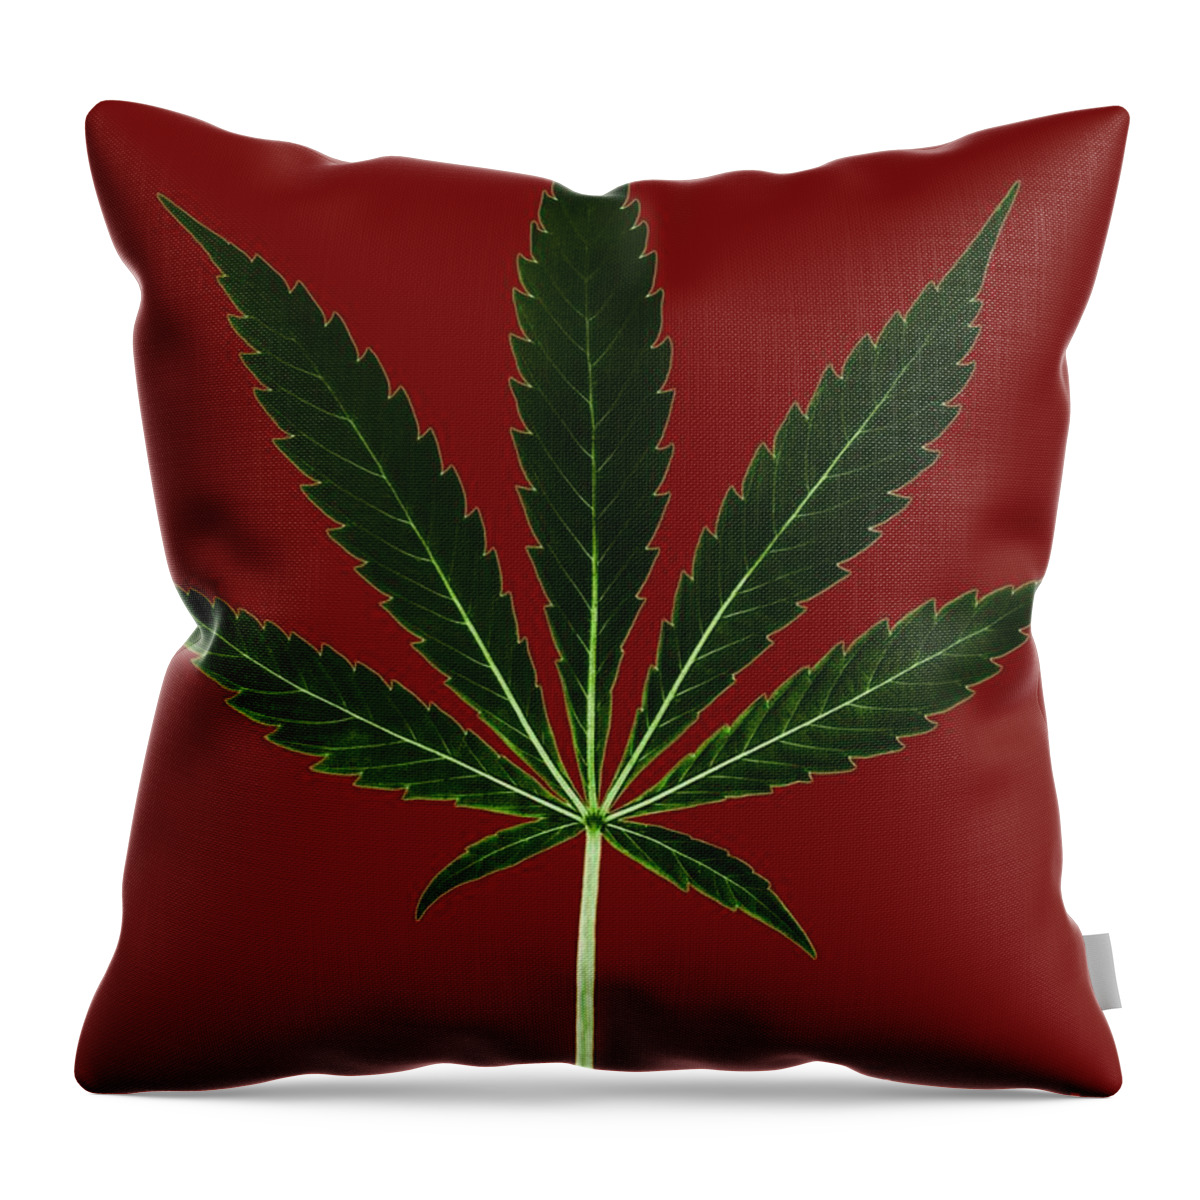 Plant Throw Pillow featuring the photograph Cannabis Sativa, Marijuana Leaf #1 by Science Source